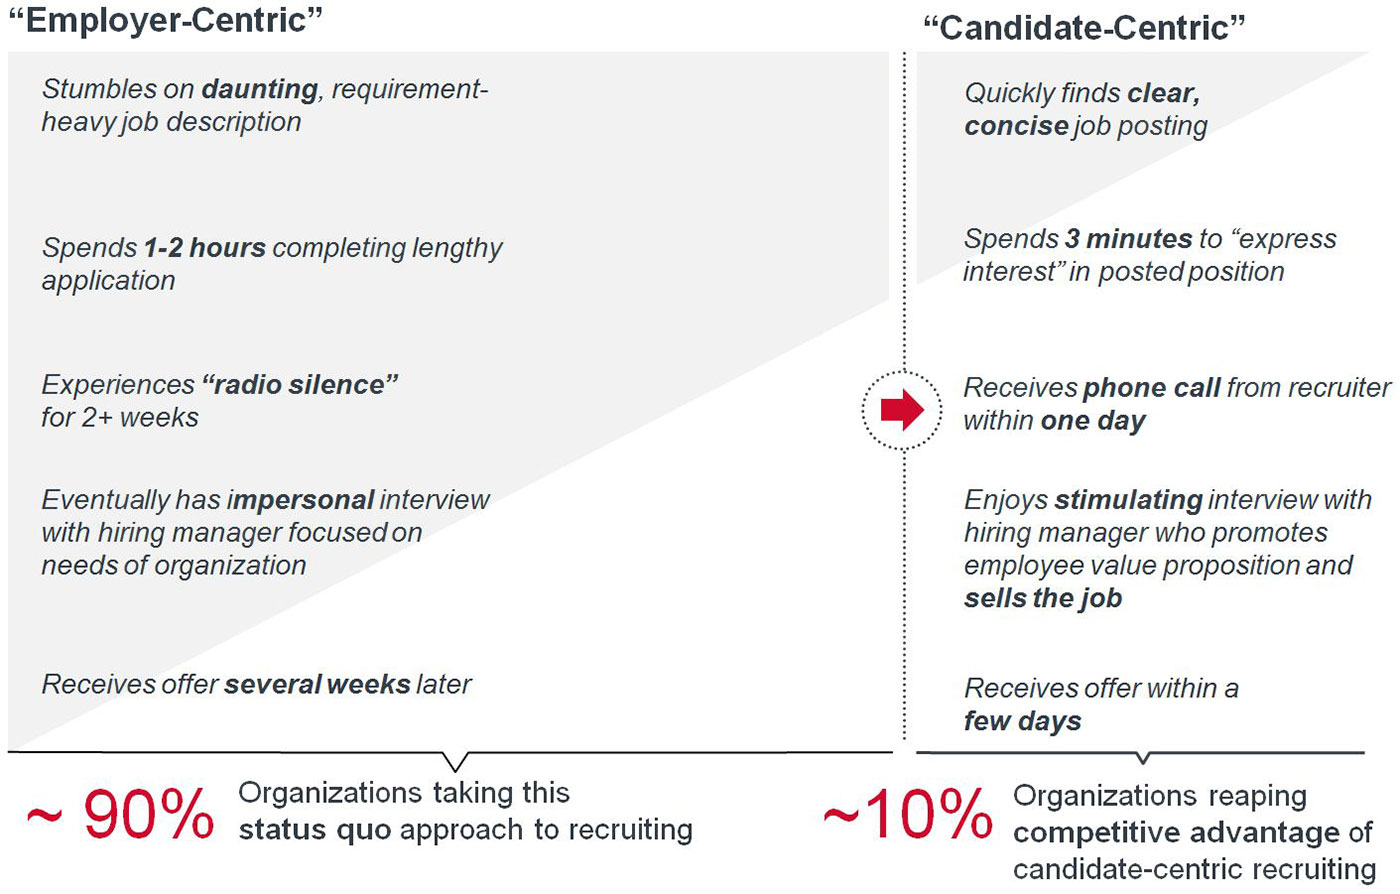 employer-centric vs. candidate-centric recruiting